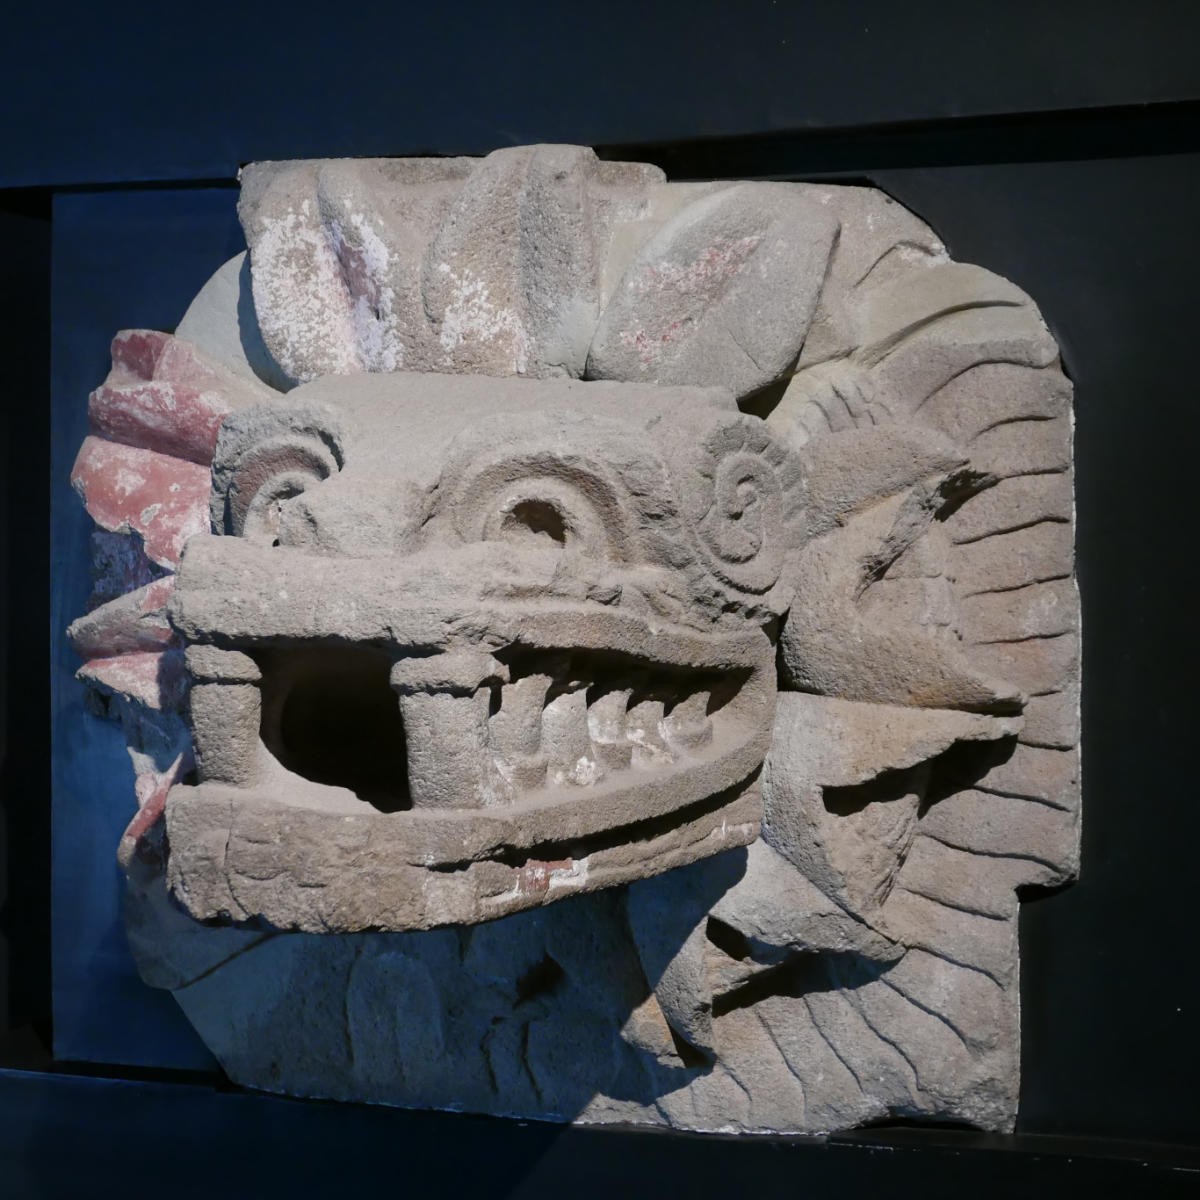 Piece of art in Teotihuacan museum